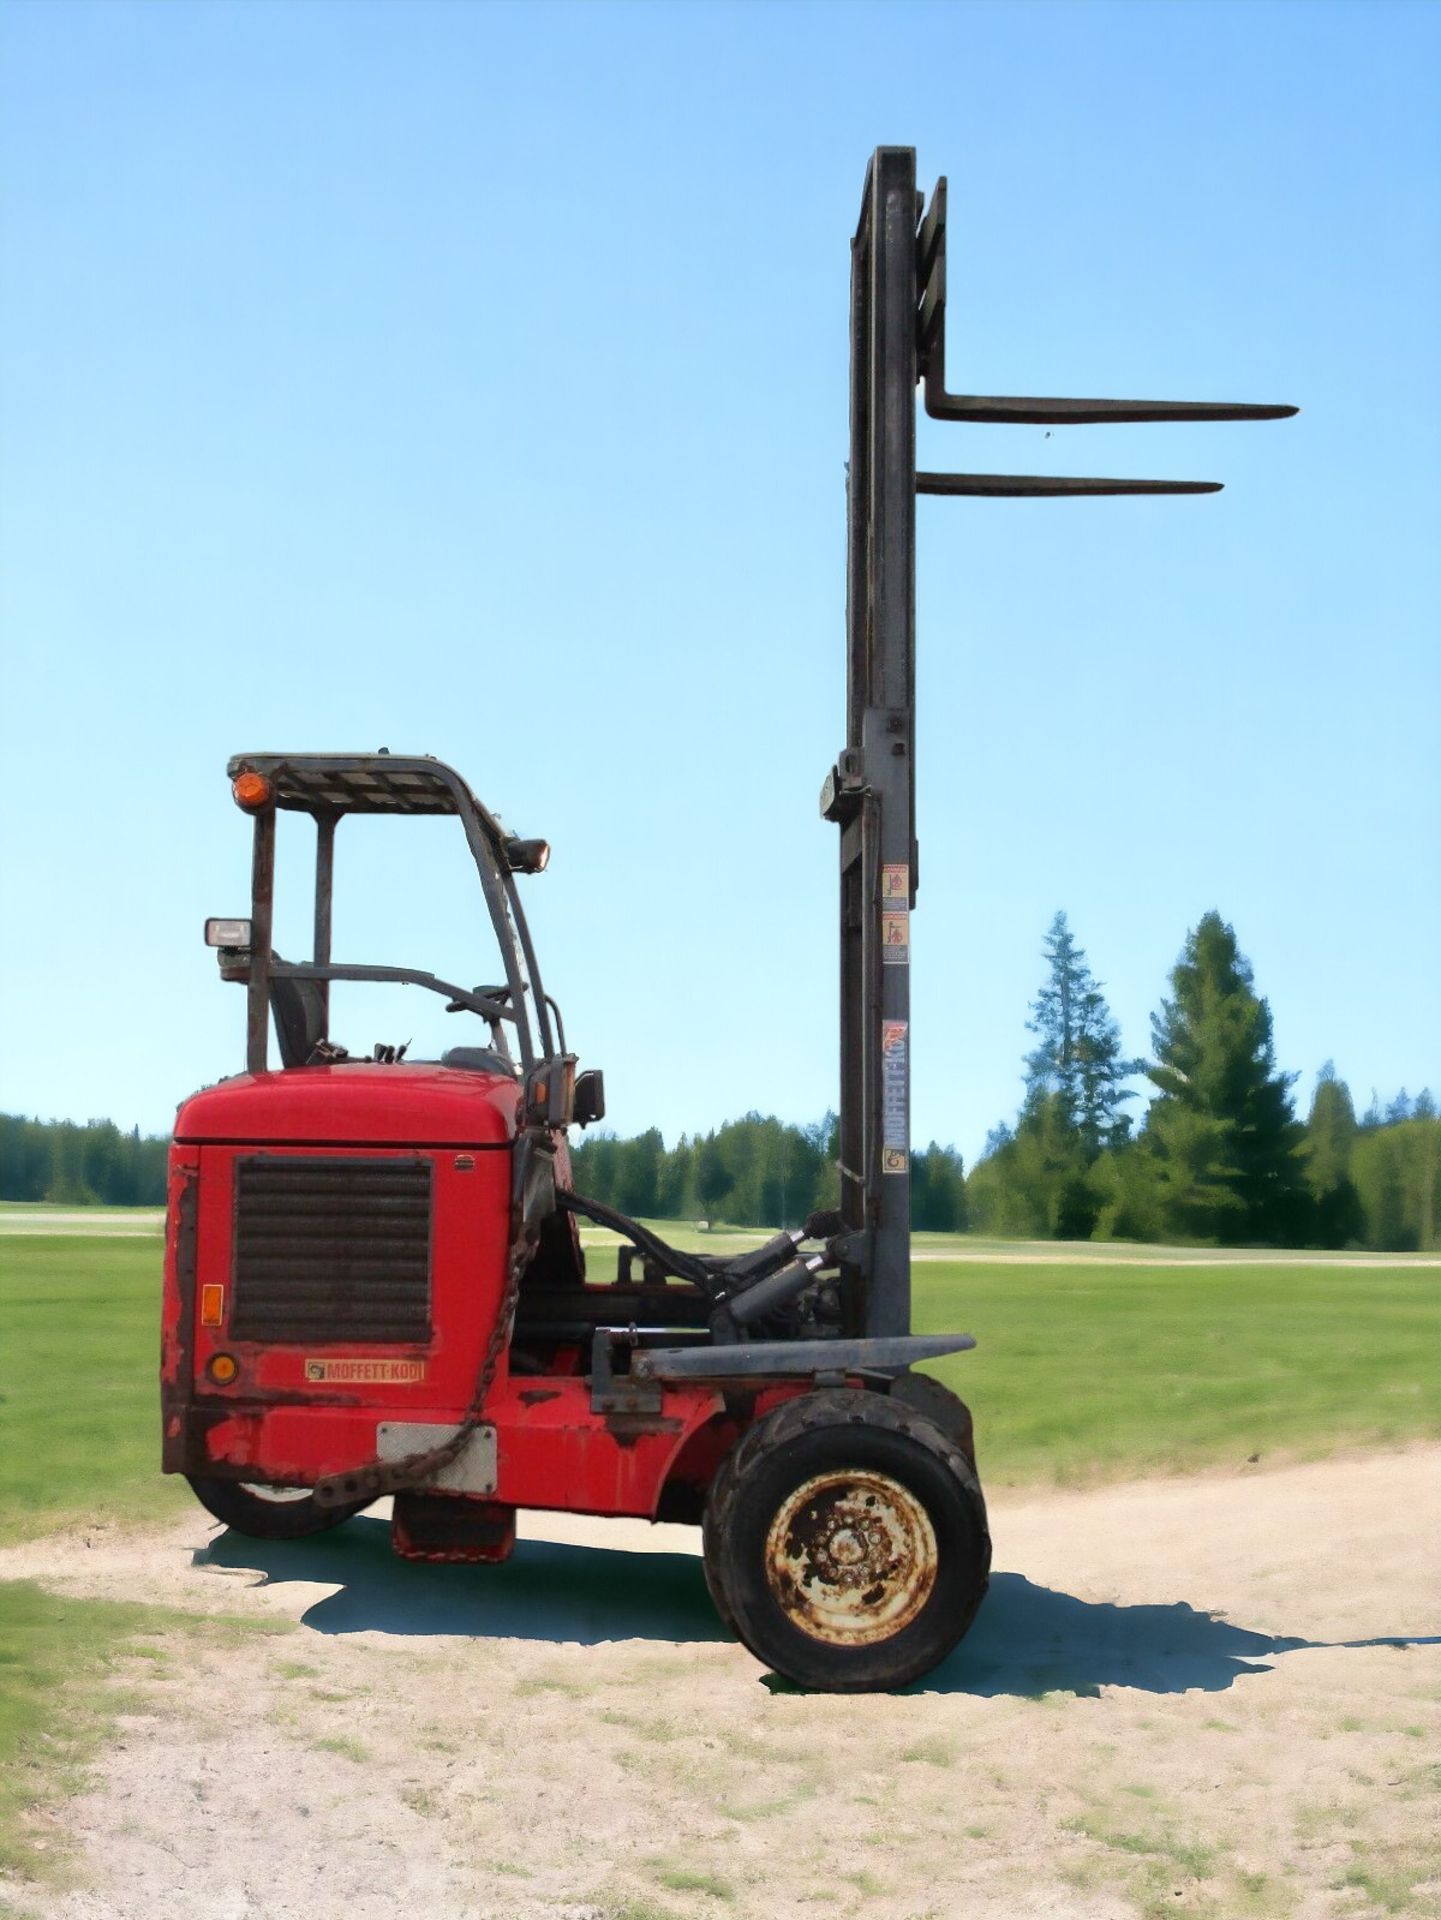 TERRAIN WITH THE MIGHTY MOFFETT MOUNTY M8 25.4 FORKLIFT